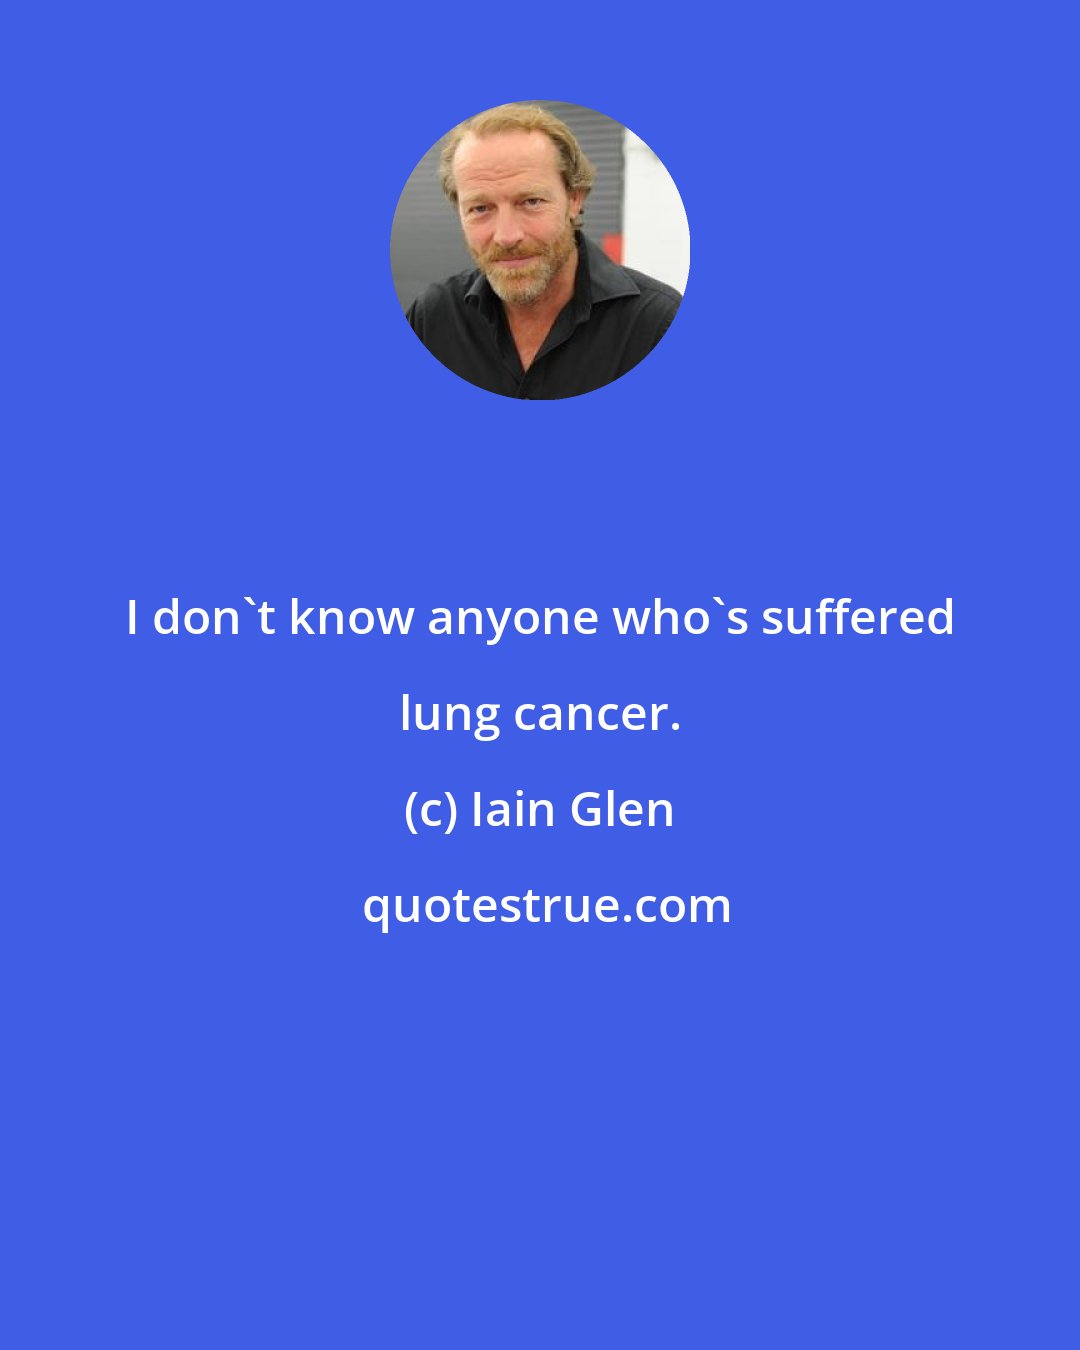 Iain Glen: I don't know anyone who's suffered lung cancer.